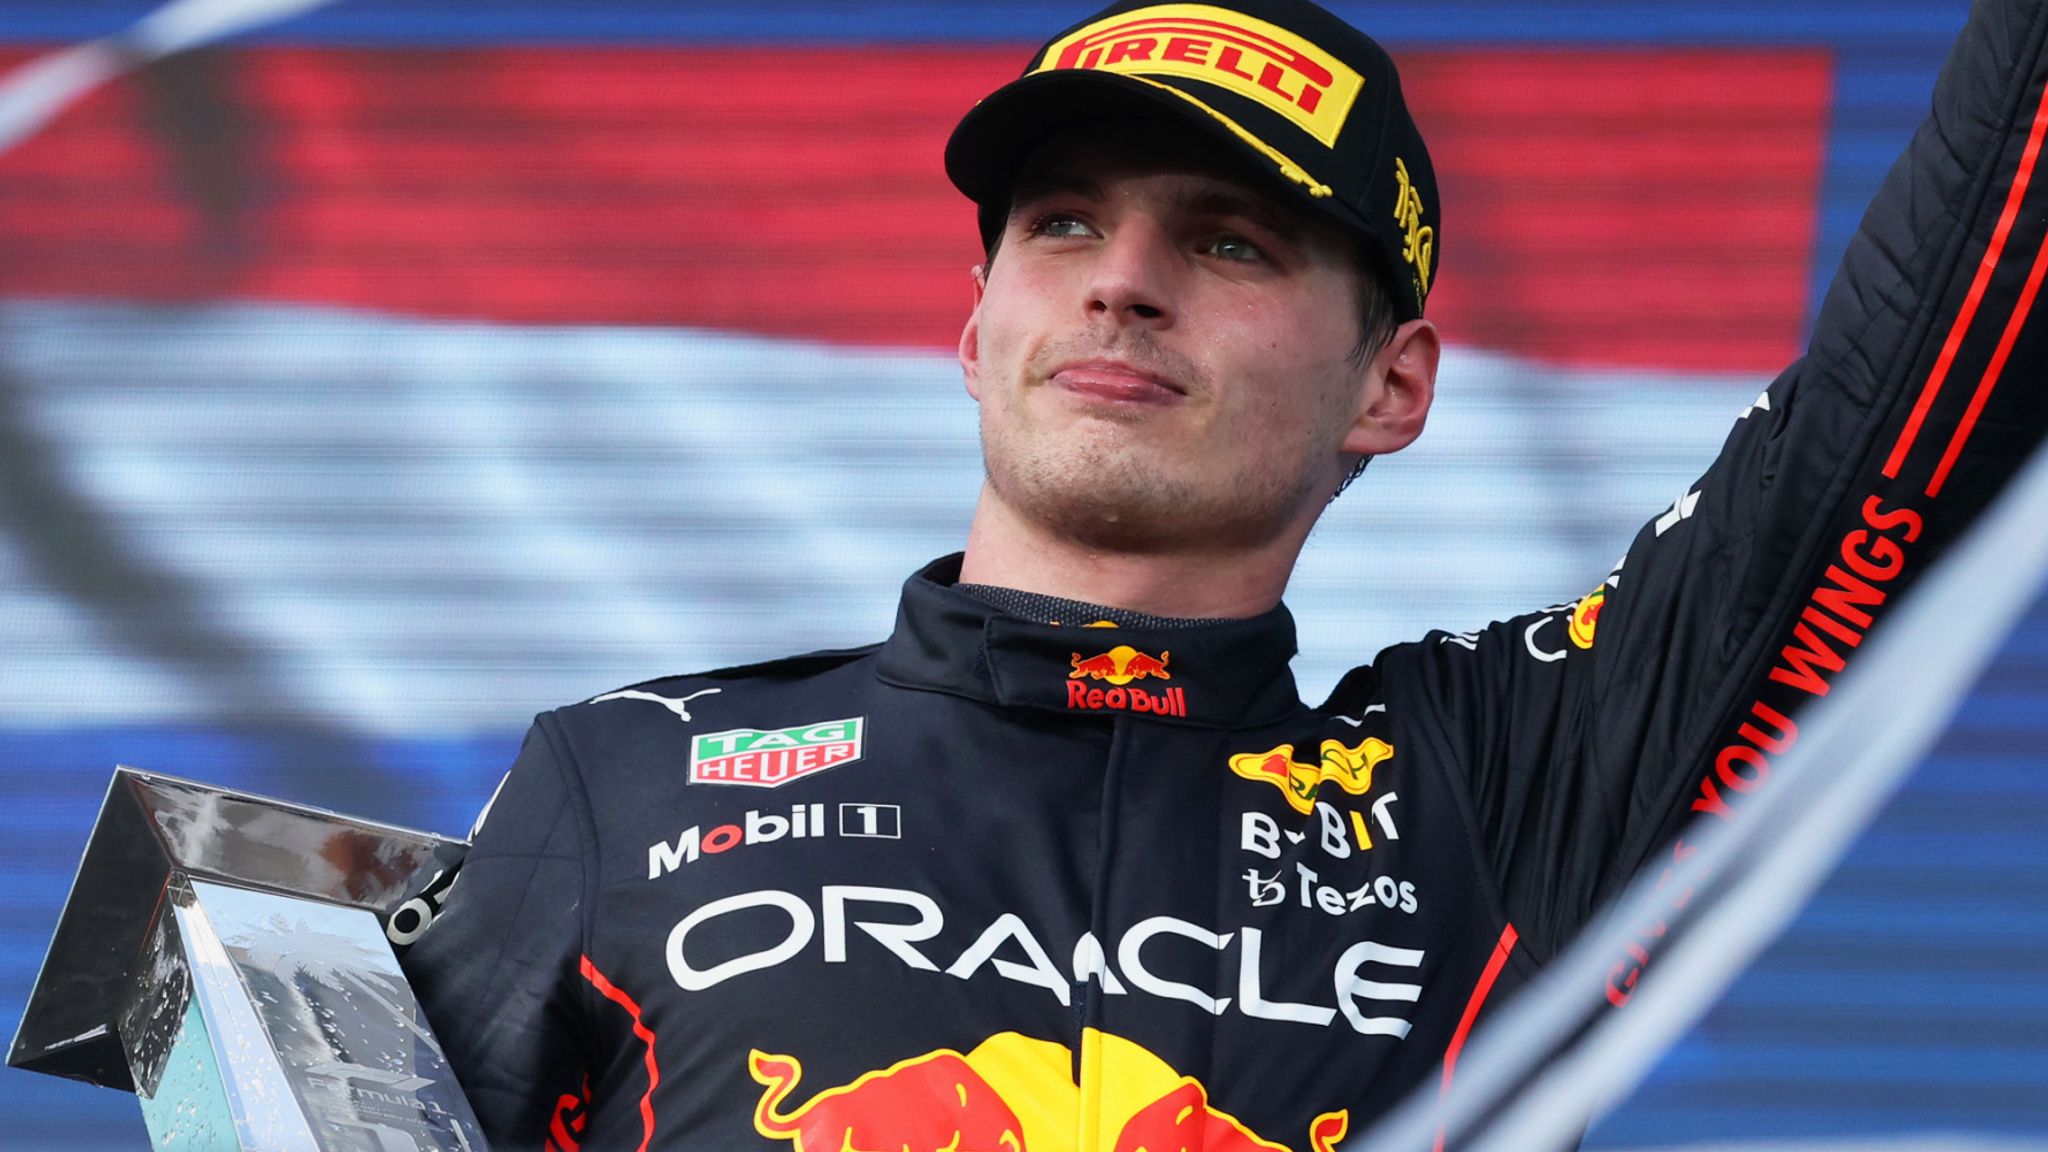 Highest Paid Under-25 Athletes: Red Bull STAR Max Verstappen ranks 4TH among highest paid athletes under 25 - Check out FULL LIST